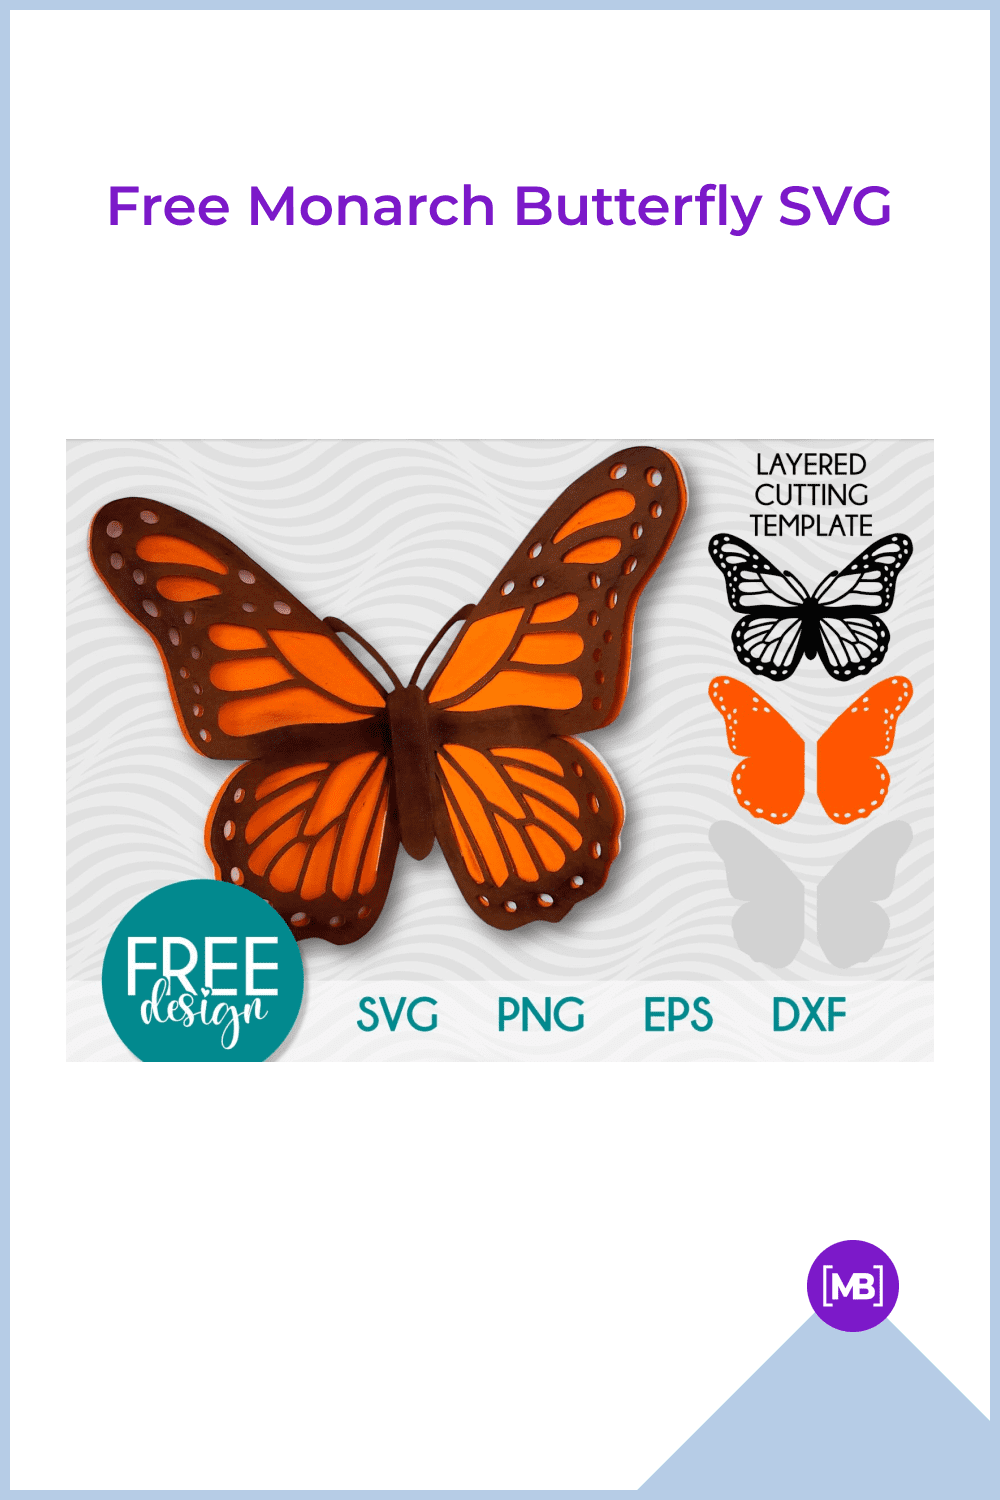 Free Monarch Butterfly SVG.